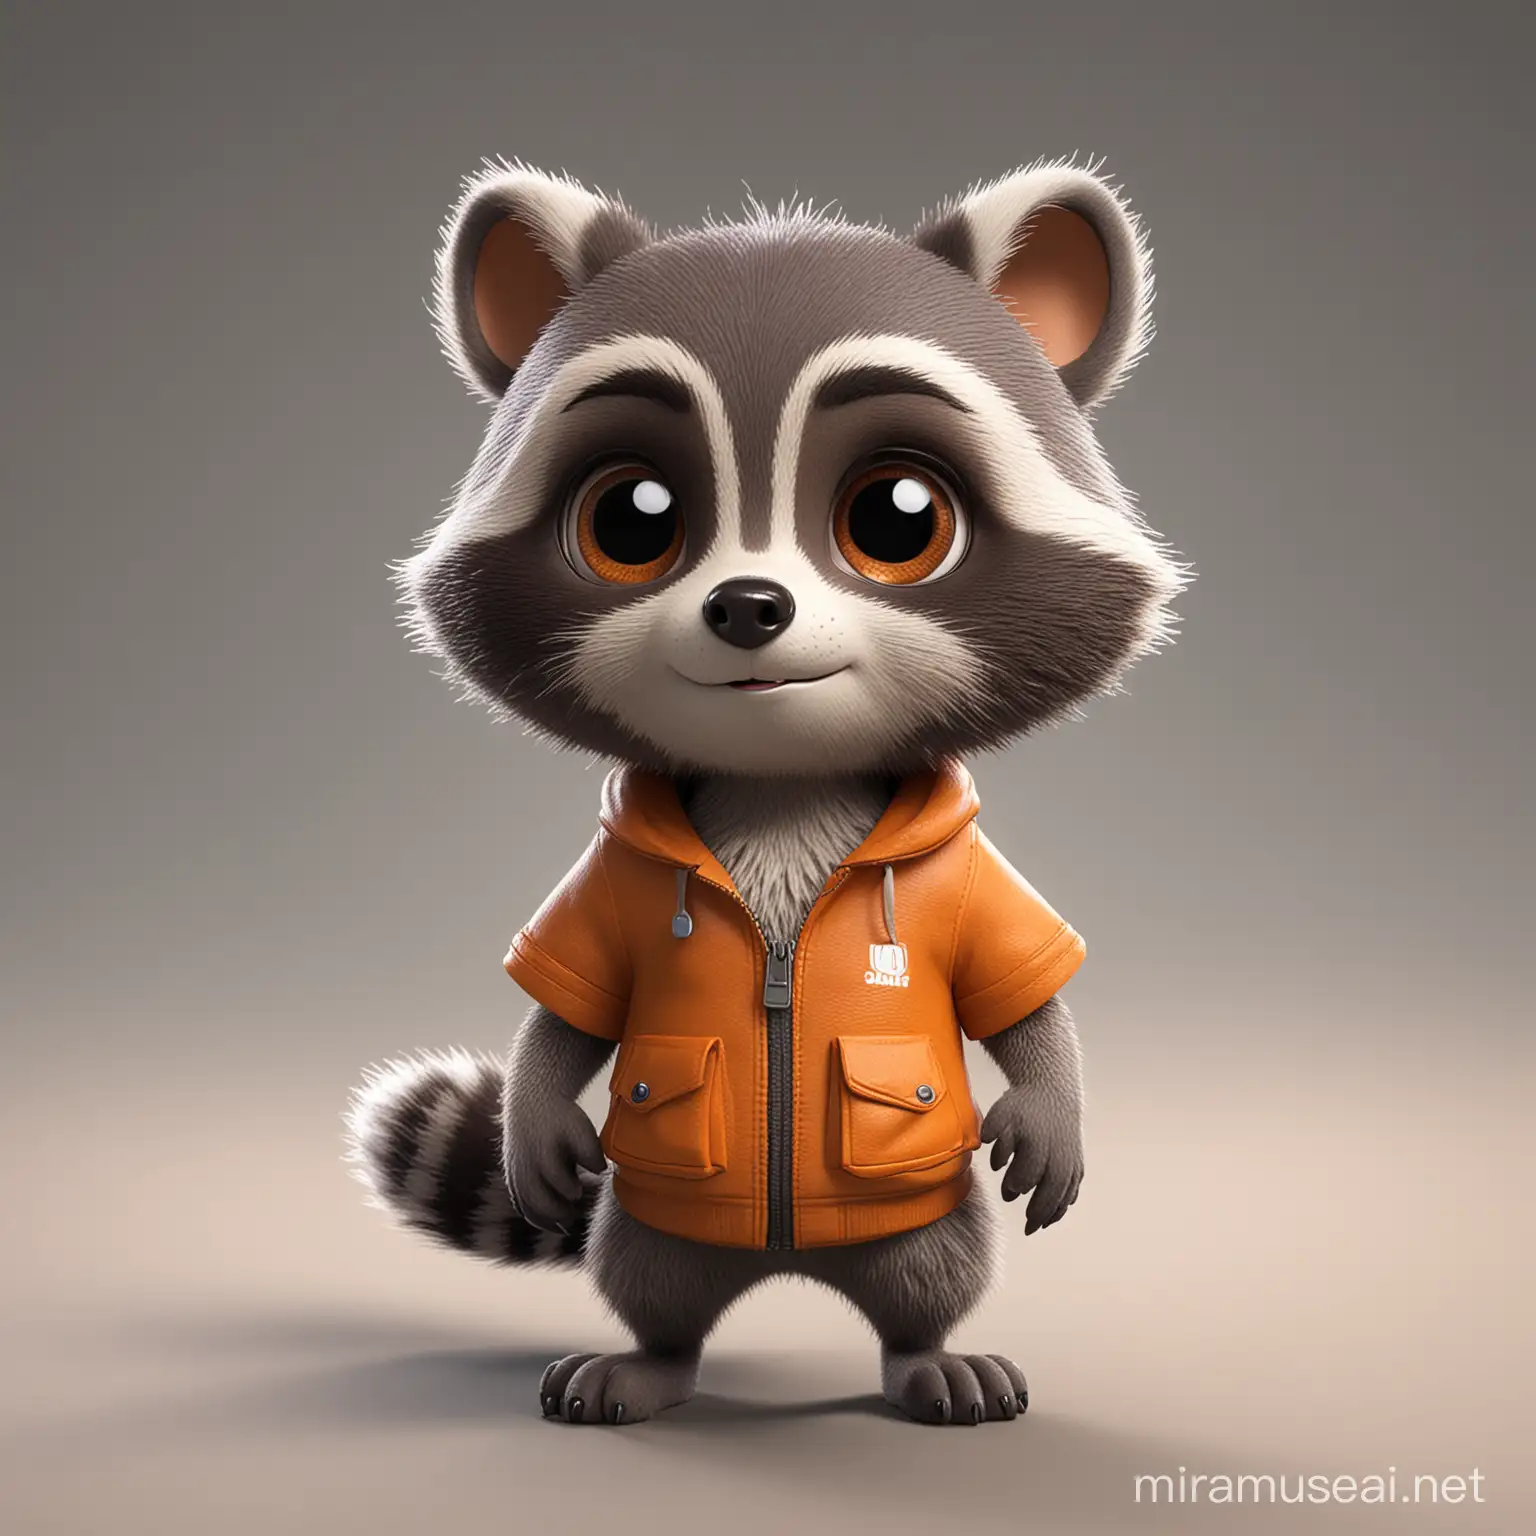 Chibi Raccoon in a PixarAnime Fusion with Vibrant Saturation and Minimal Textures